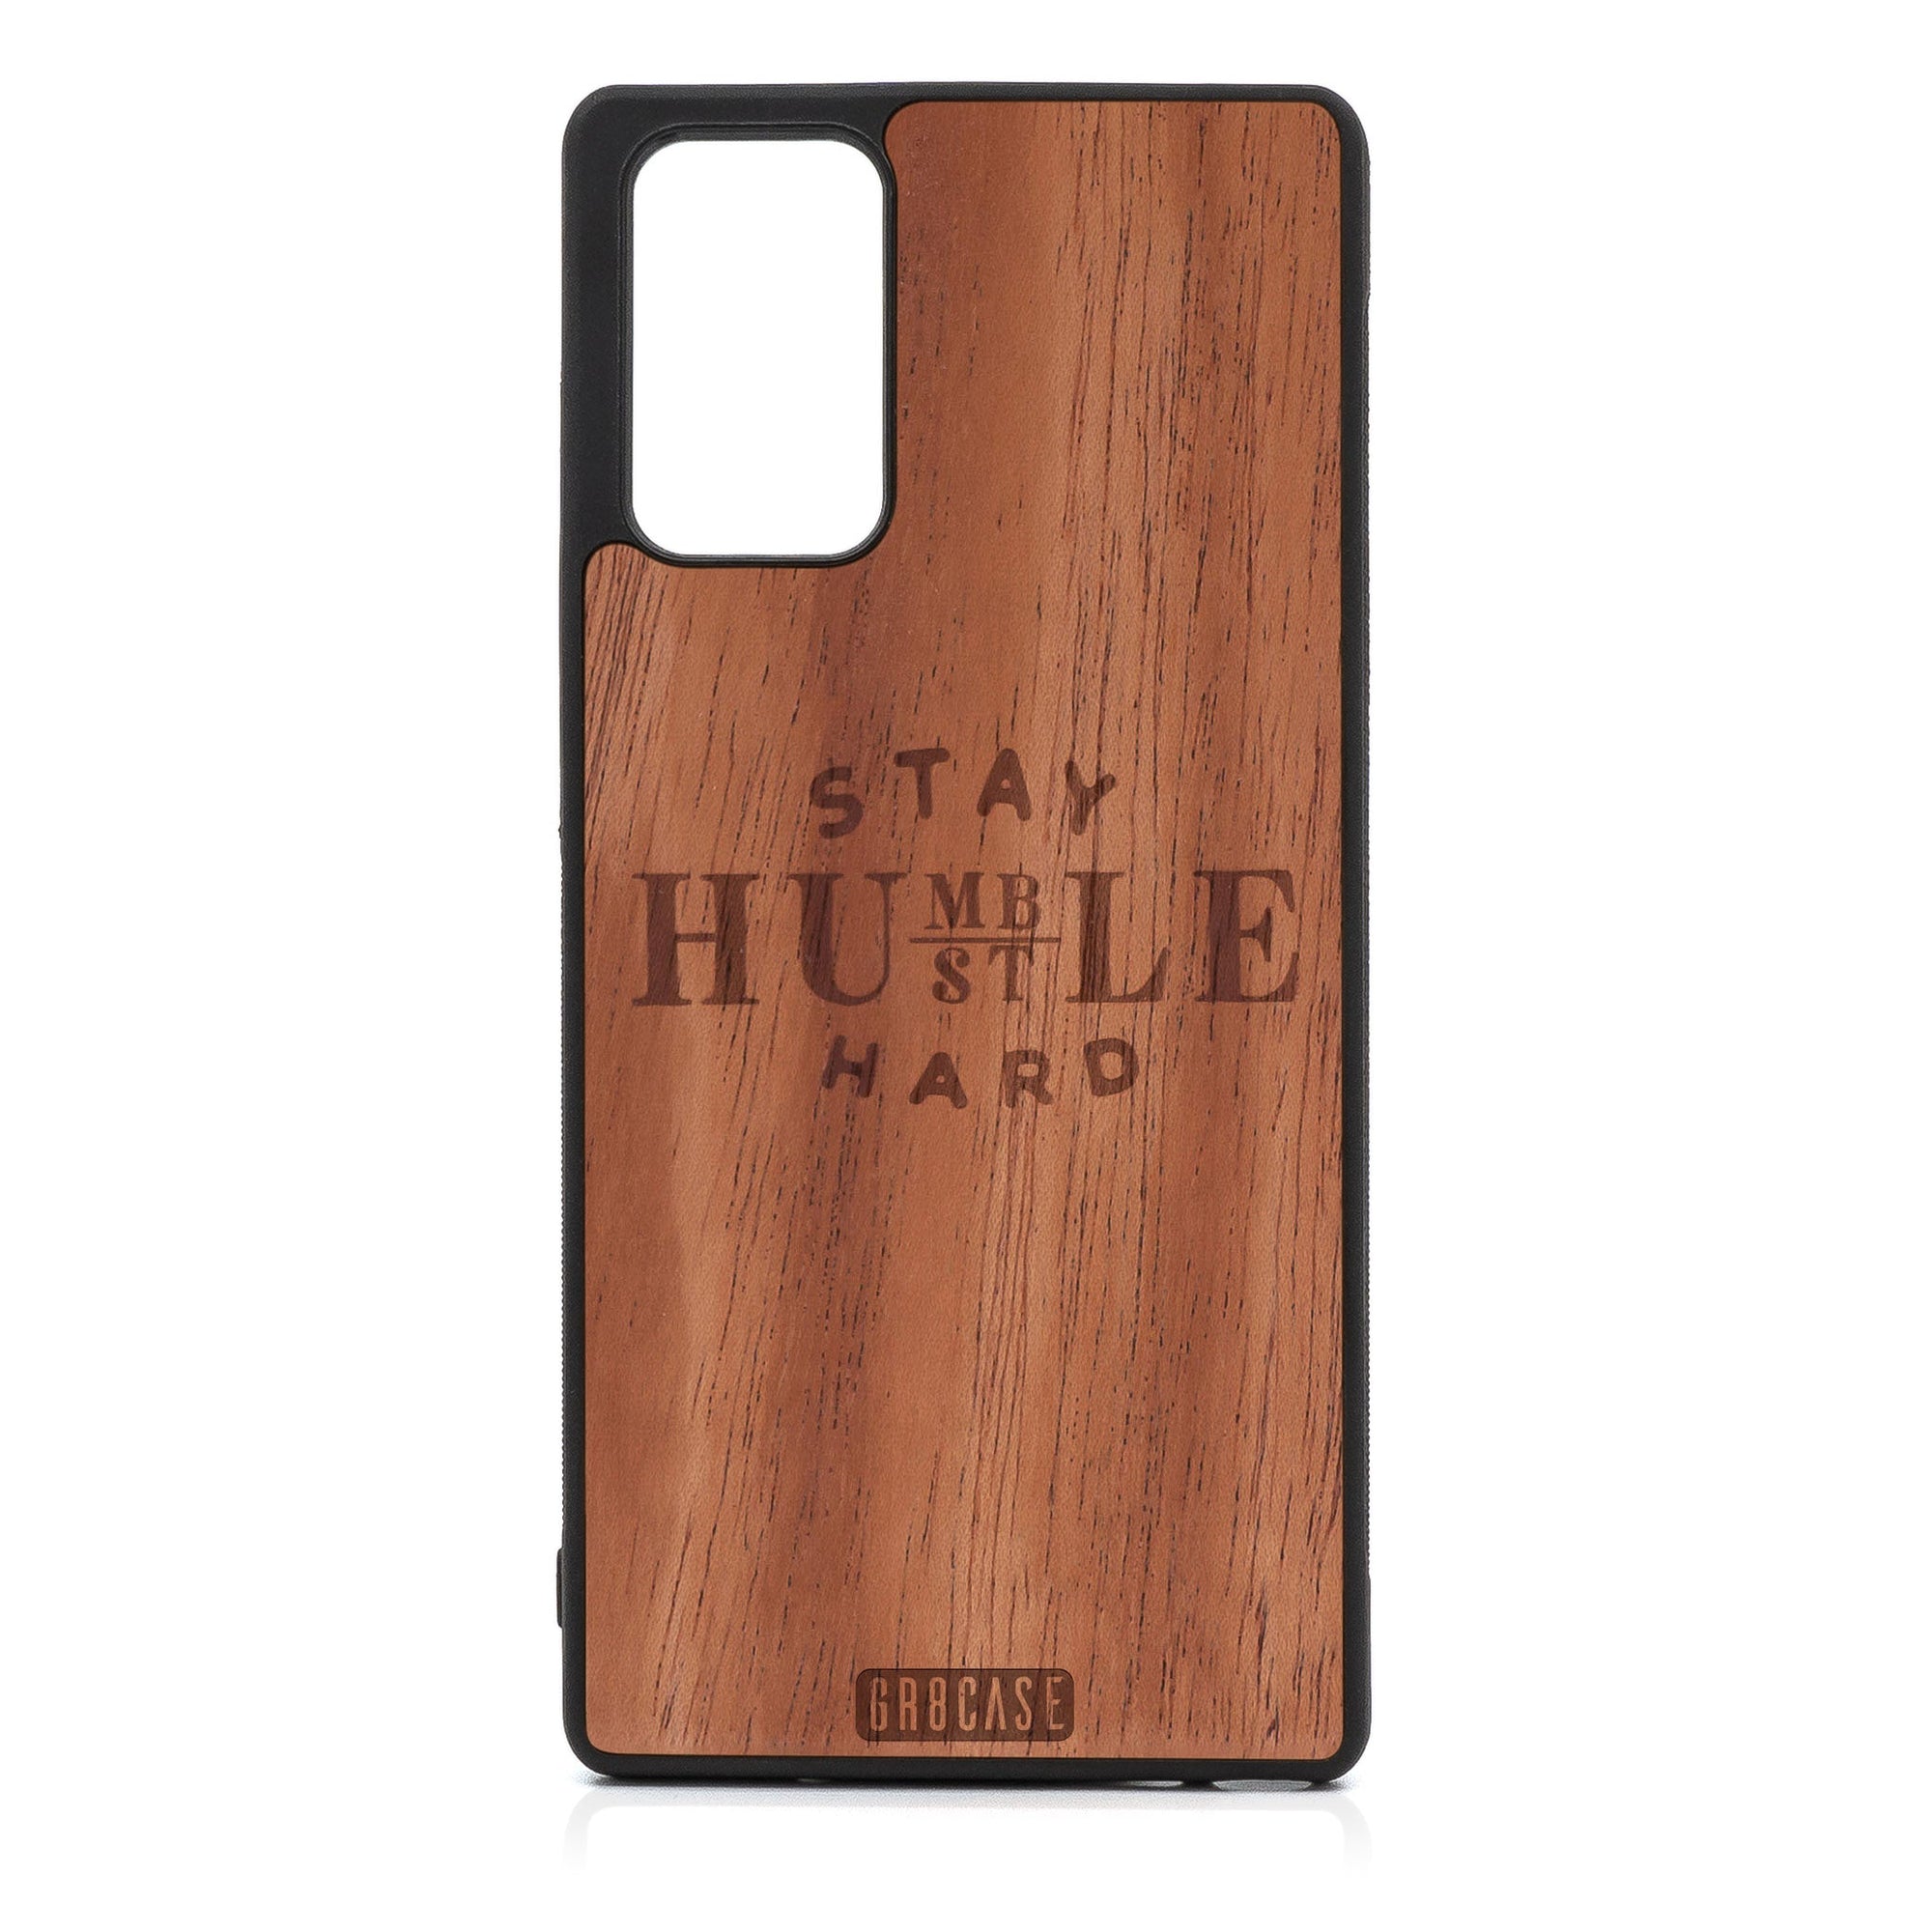 Stay Humble Hustle Hard Design Wood Case For Samsung Galaxy A52 5G